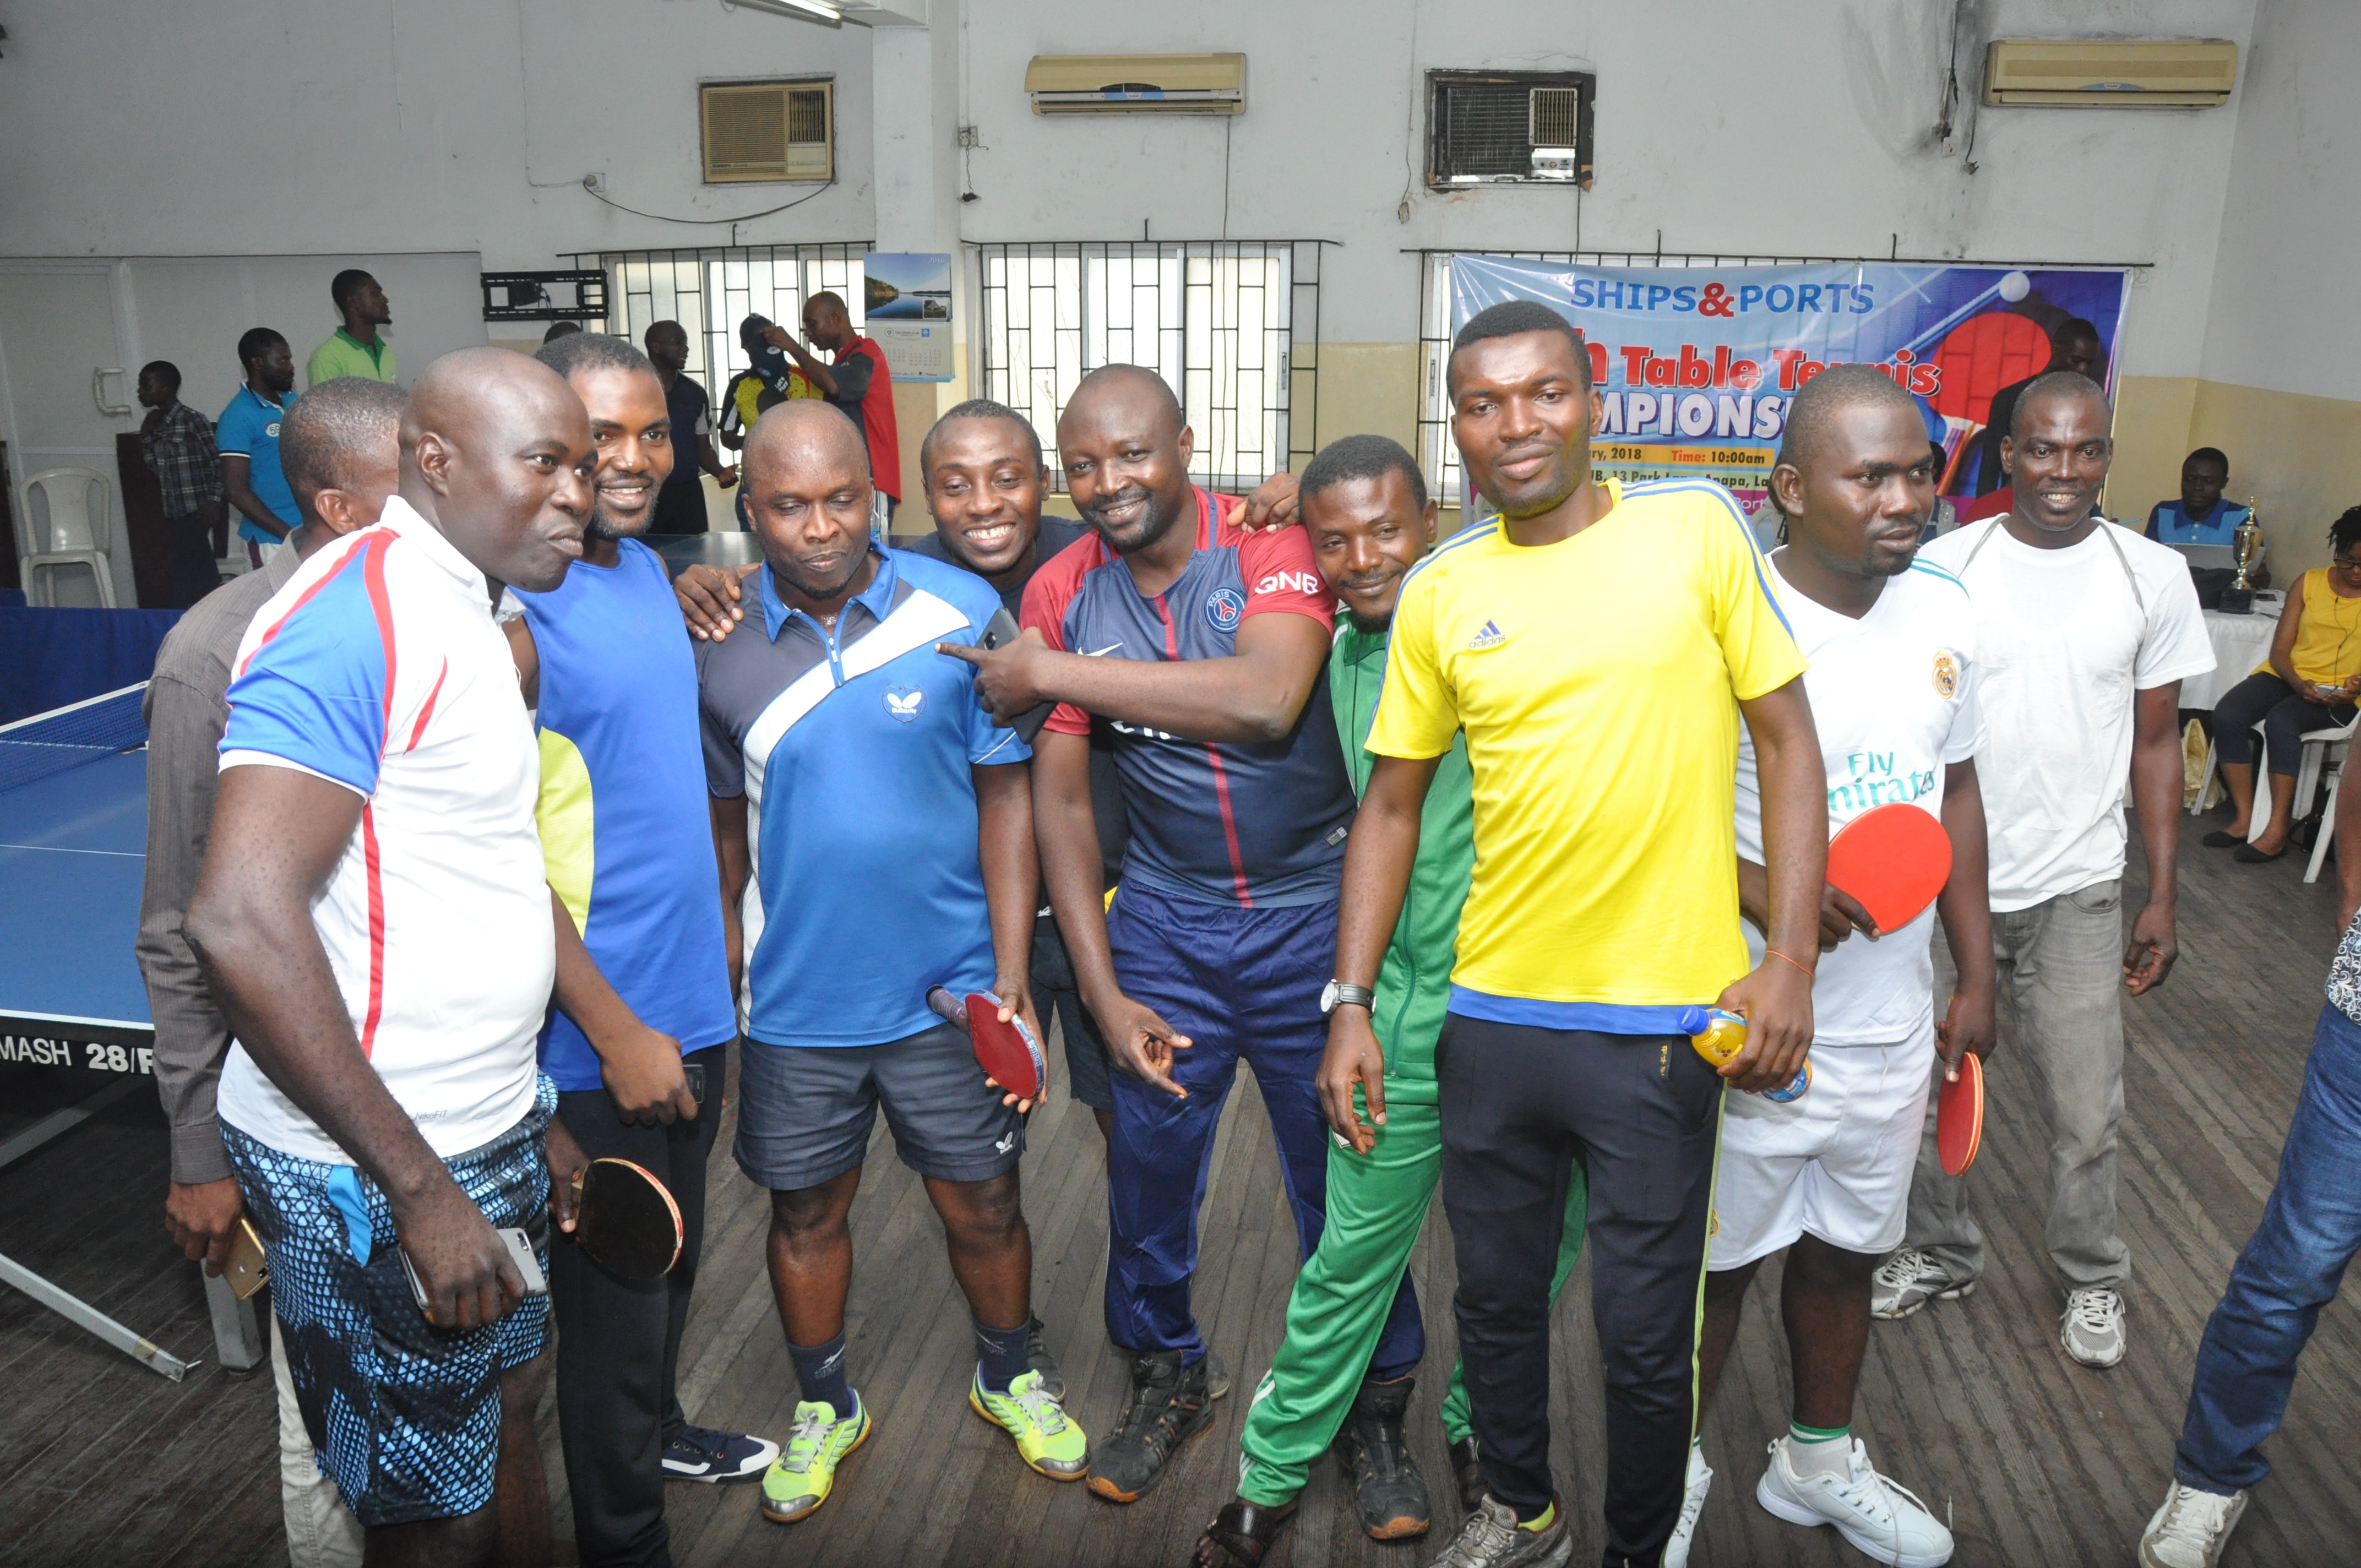 Some of the participants jubilating with the winner, Jeremiah Ikoko.